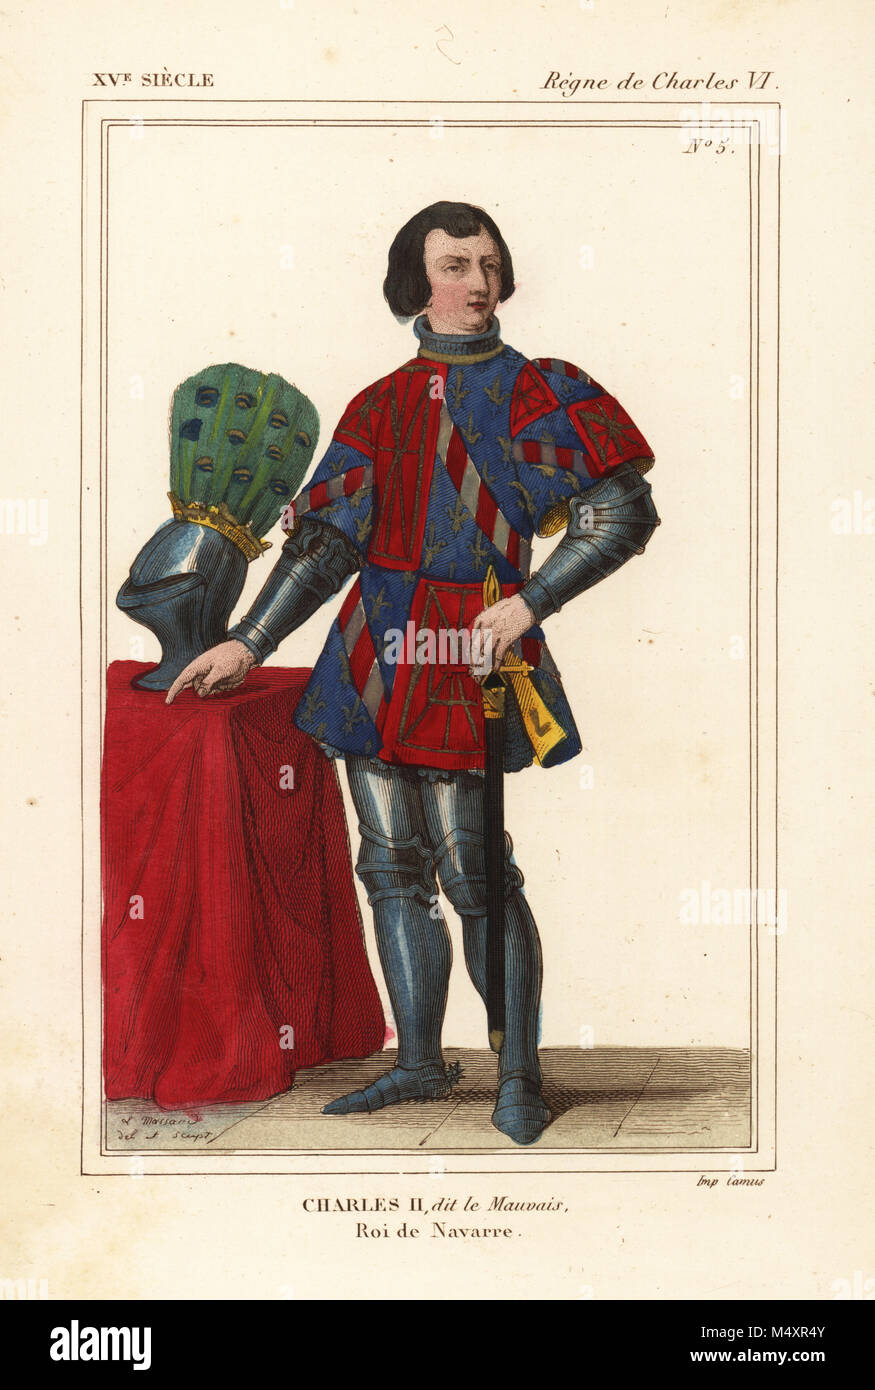 King Charles II of Navarre, le Mauvais, comte d'Evreux, 1332-1387.  Handcoloured lithograph by Leopold Massard after a stained-glass window in  Notre-Dame d'Evreux in Roger de Gaignieres' portfolio V 19 from Le  Bibliophile